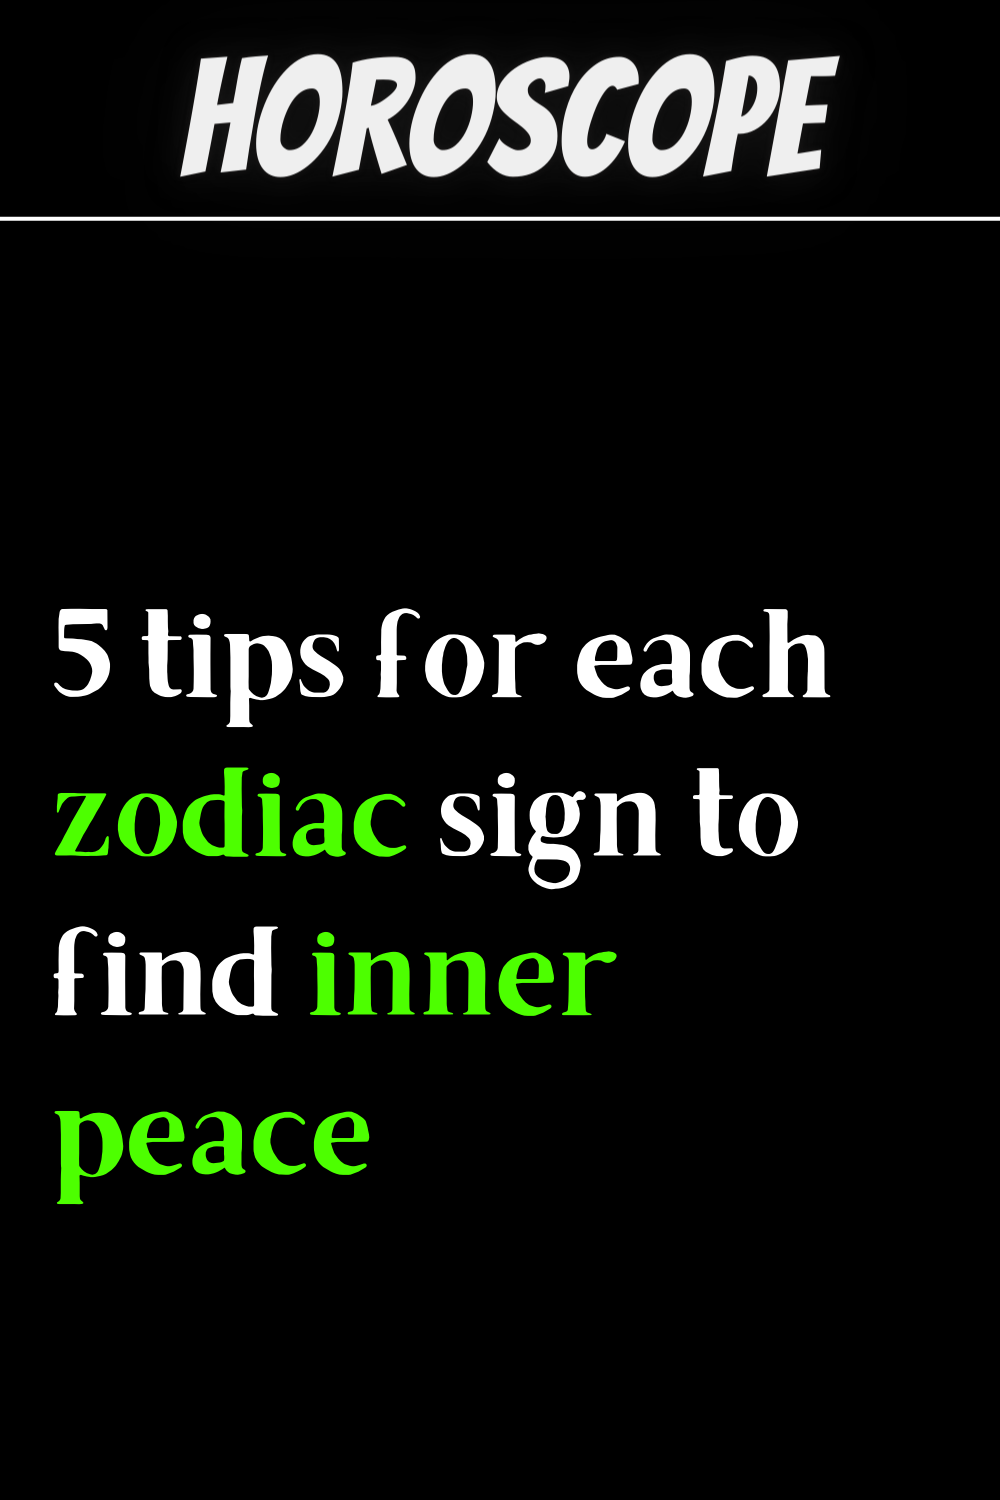 5 tips for each zodiac sign to find inner peace